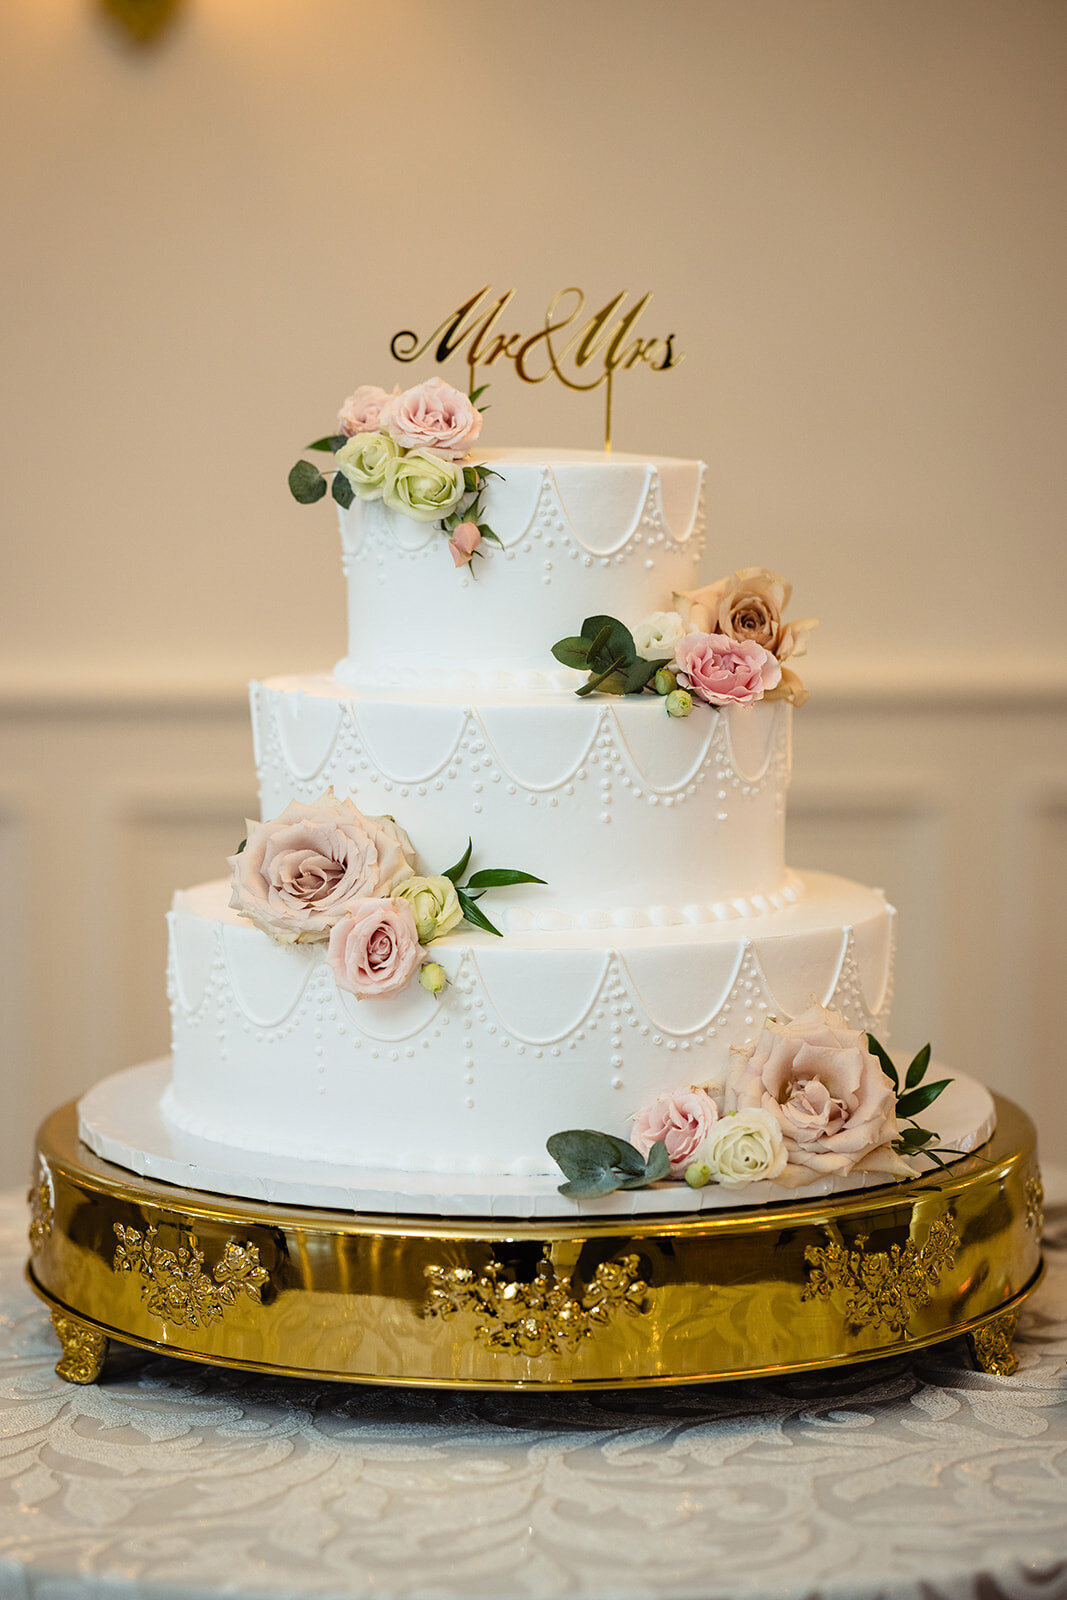 A white three-tiered wedding cake with 'Mr & Mrs' topper and adorned with delicate flowers on a gold stand